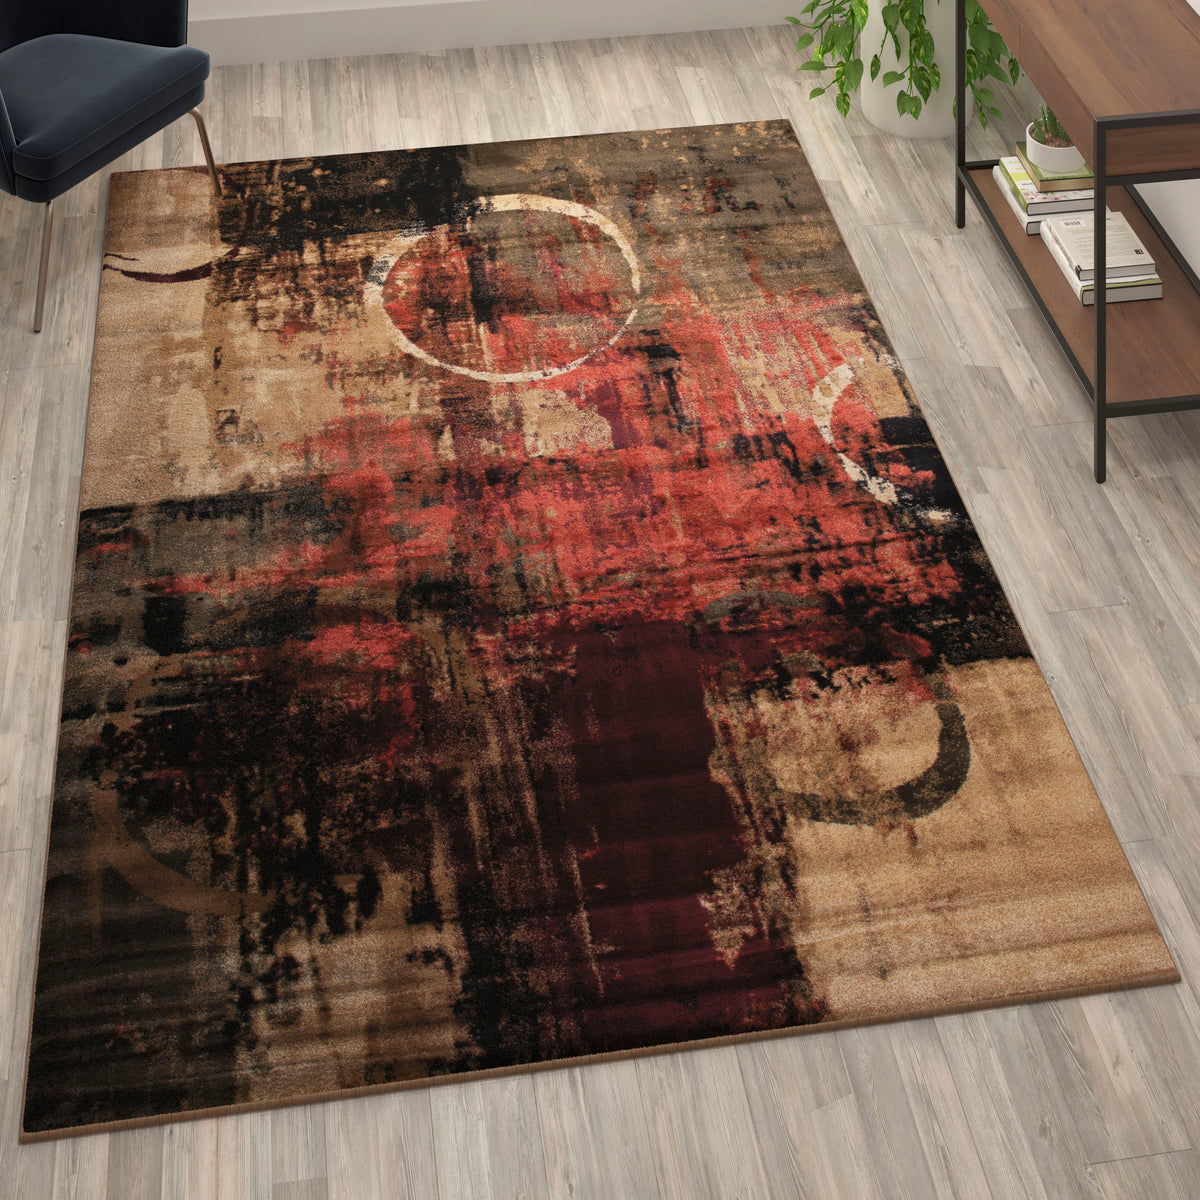 6' x 9' |#| Modern Round Abstract Design Area Rug in Warm Beige, Green, and Red - 6' x 9'